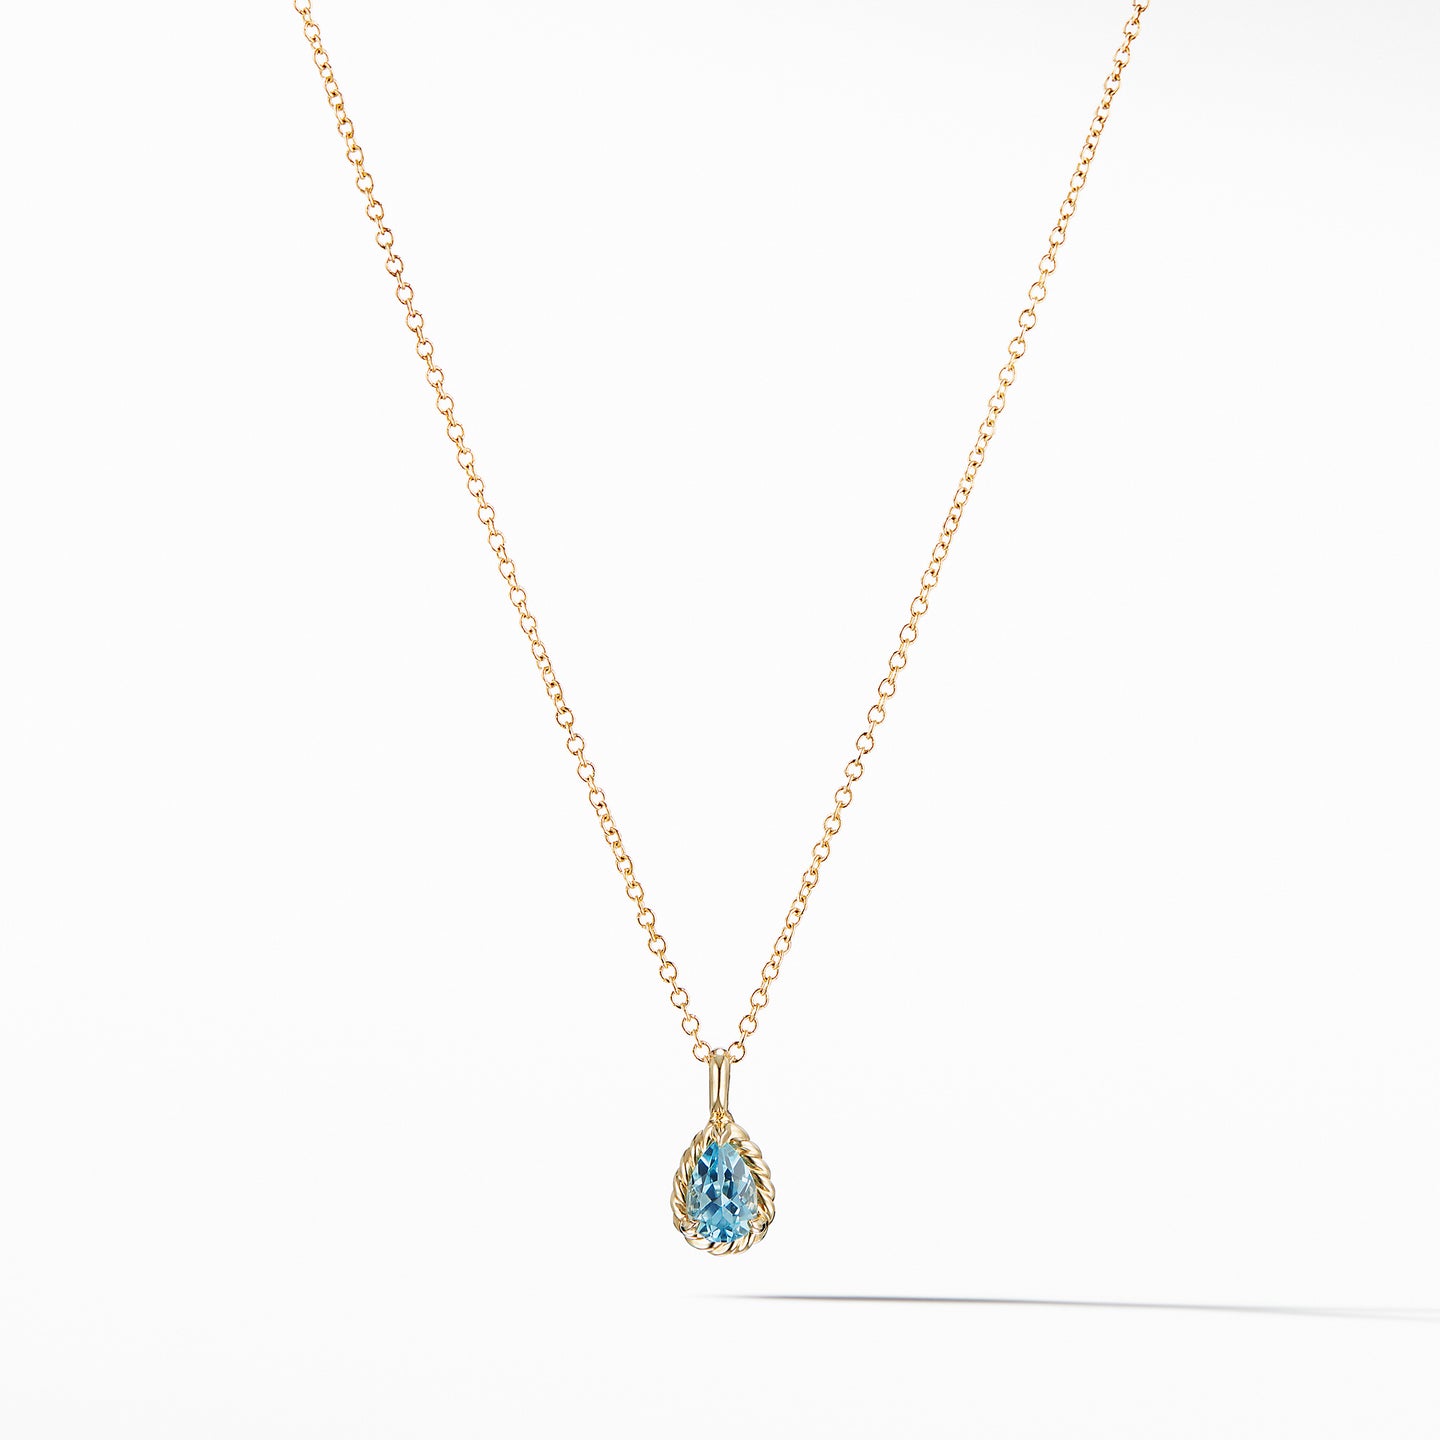 Cable Collectibles® Kids Teardrop Charm Necklace with Blue Topaz in 18K Gold